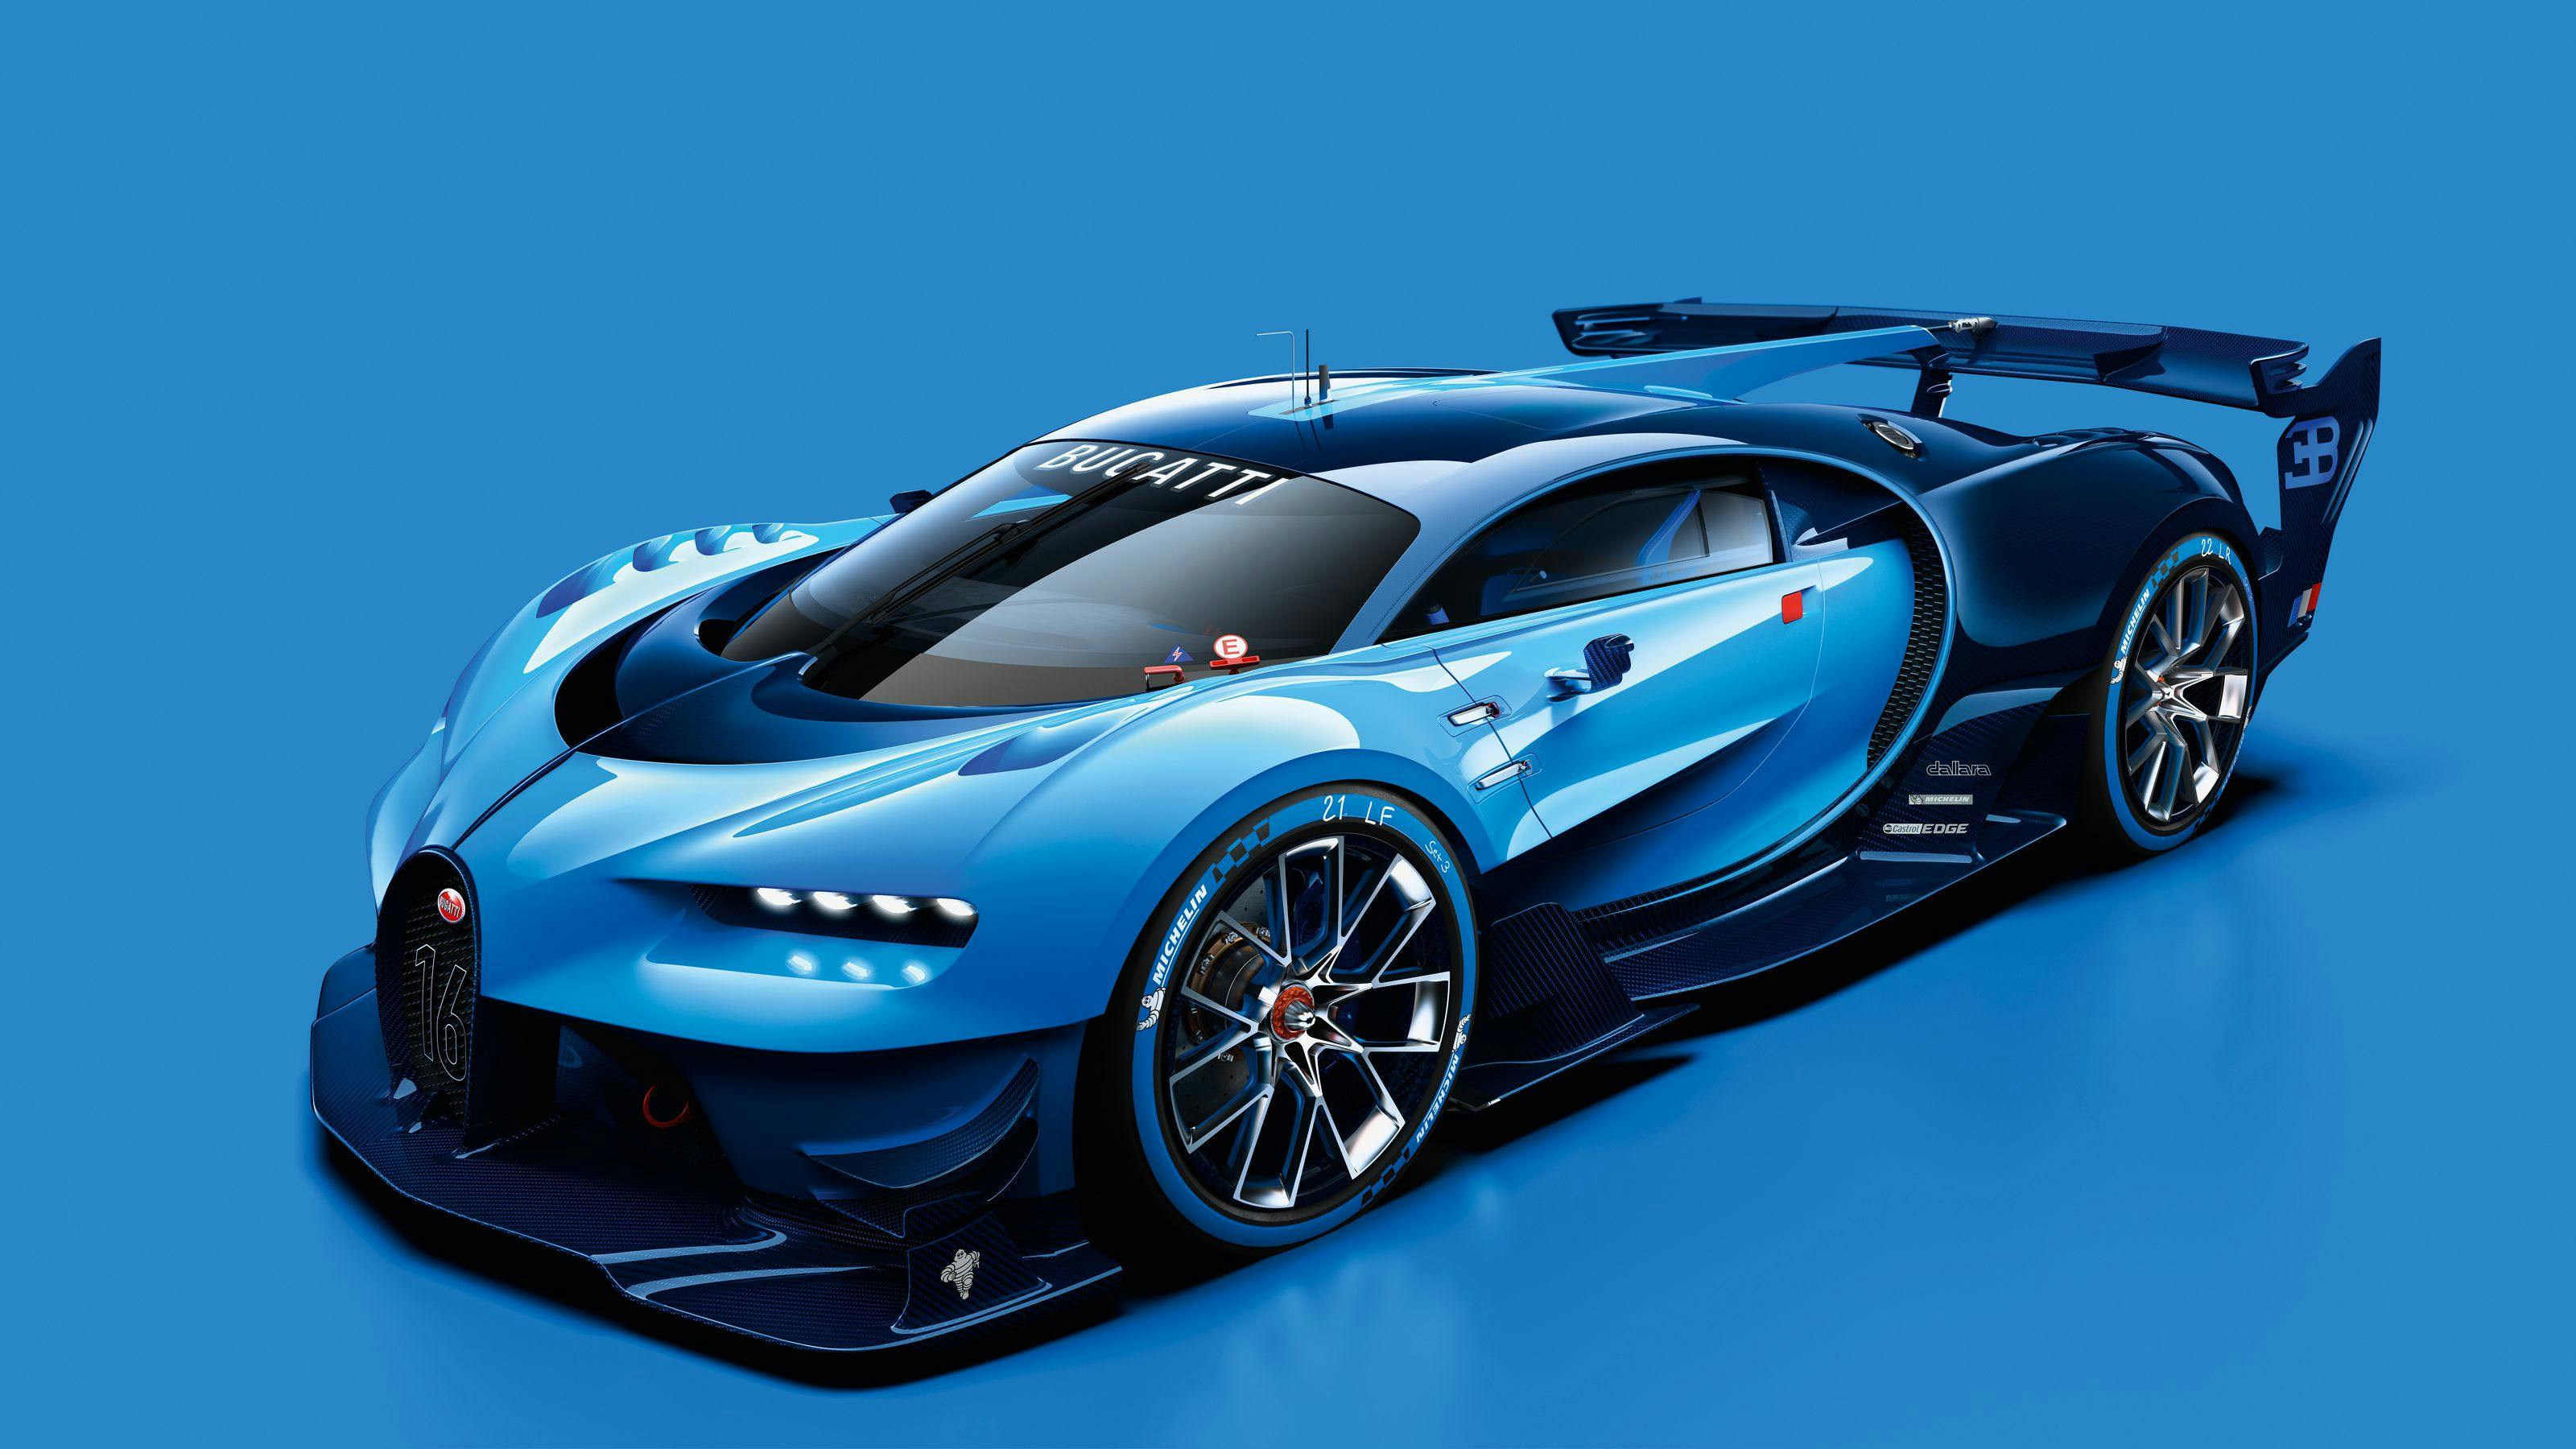 World premiere at Frankfurt Motor Show 2015: "This is for the fans" Bugatti unveils its Vision Gran Turismo show car